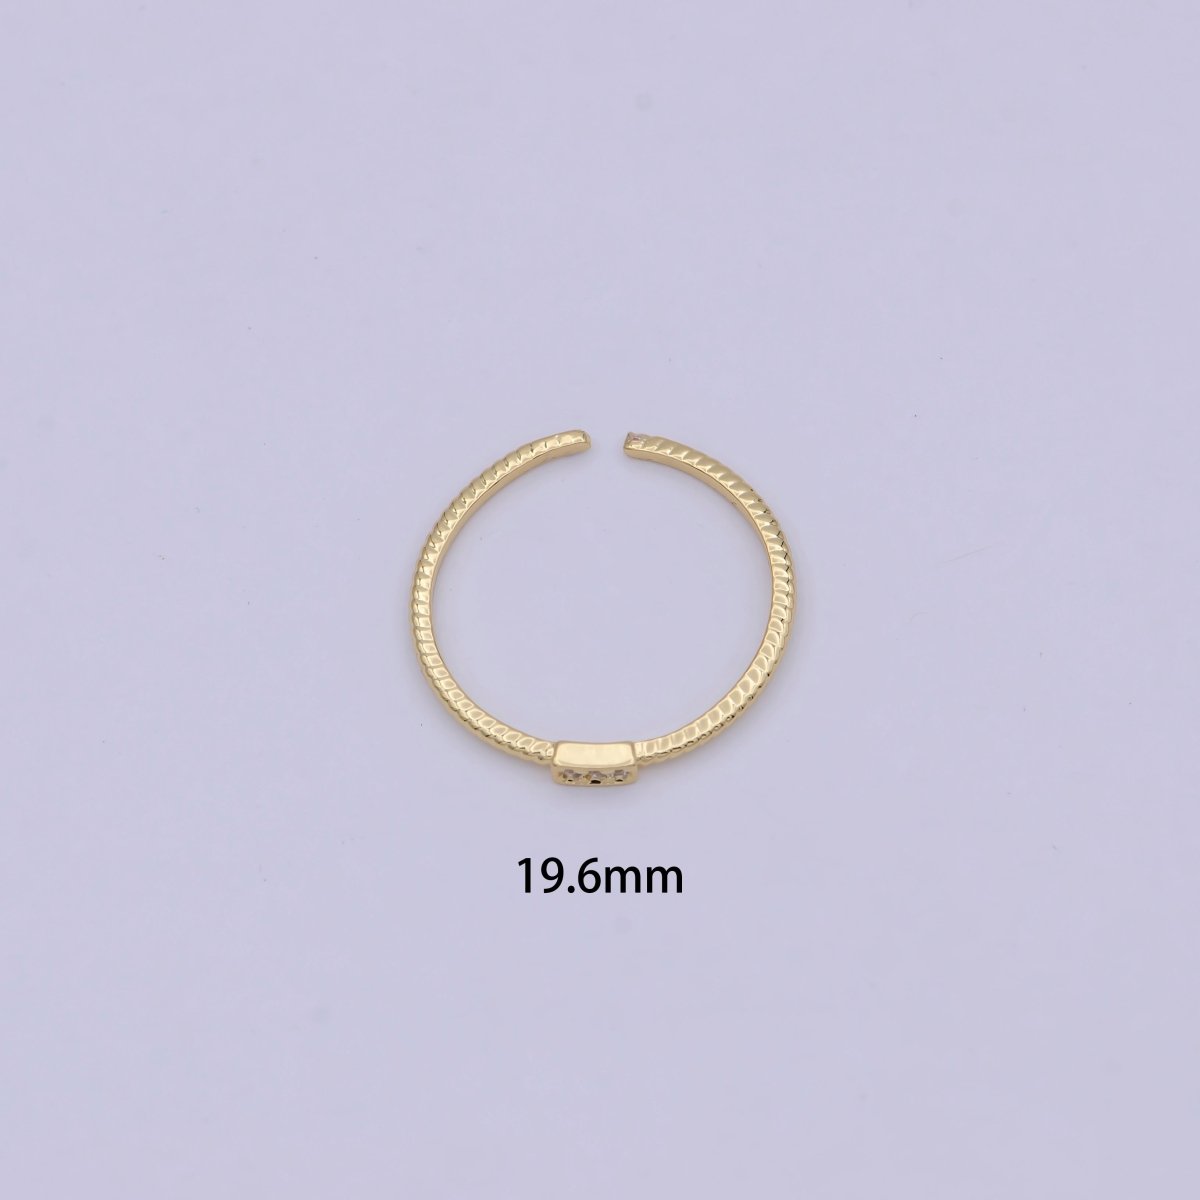 14k Gold Filled Twisted Ring- Gold Filled Stacking Ring, Minimalist Ring Band, Midi ring, Everyday Jewelry, Thin Twist Wedding Band U-478 - DLUXCA